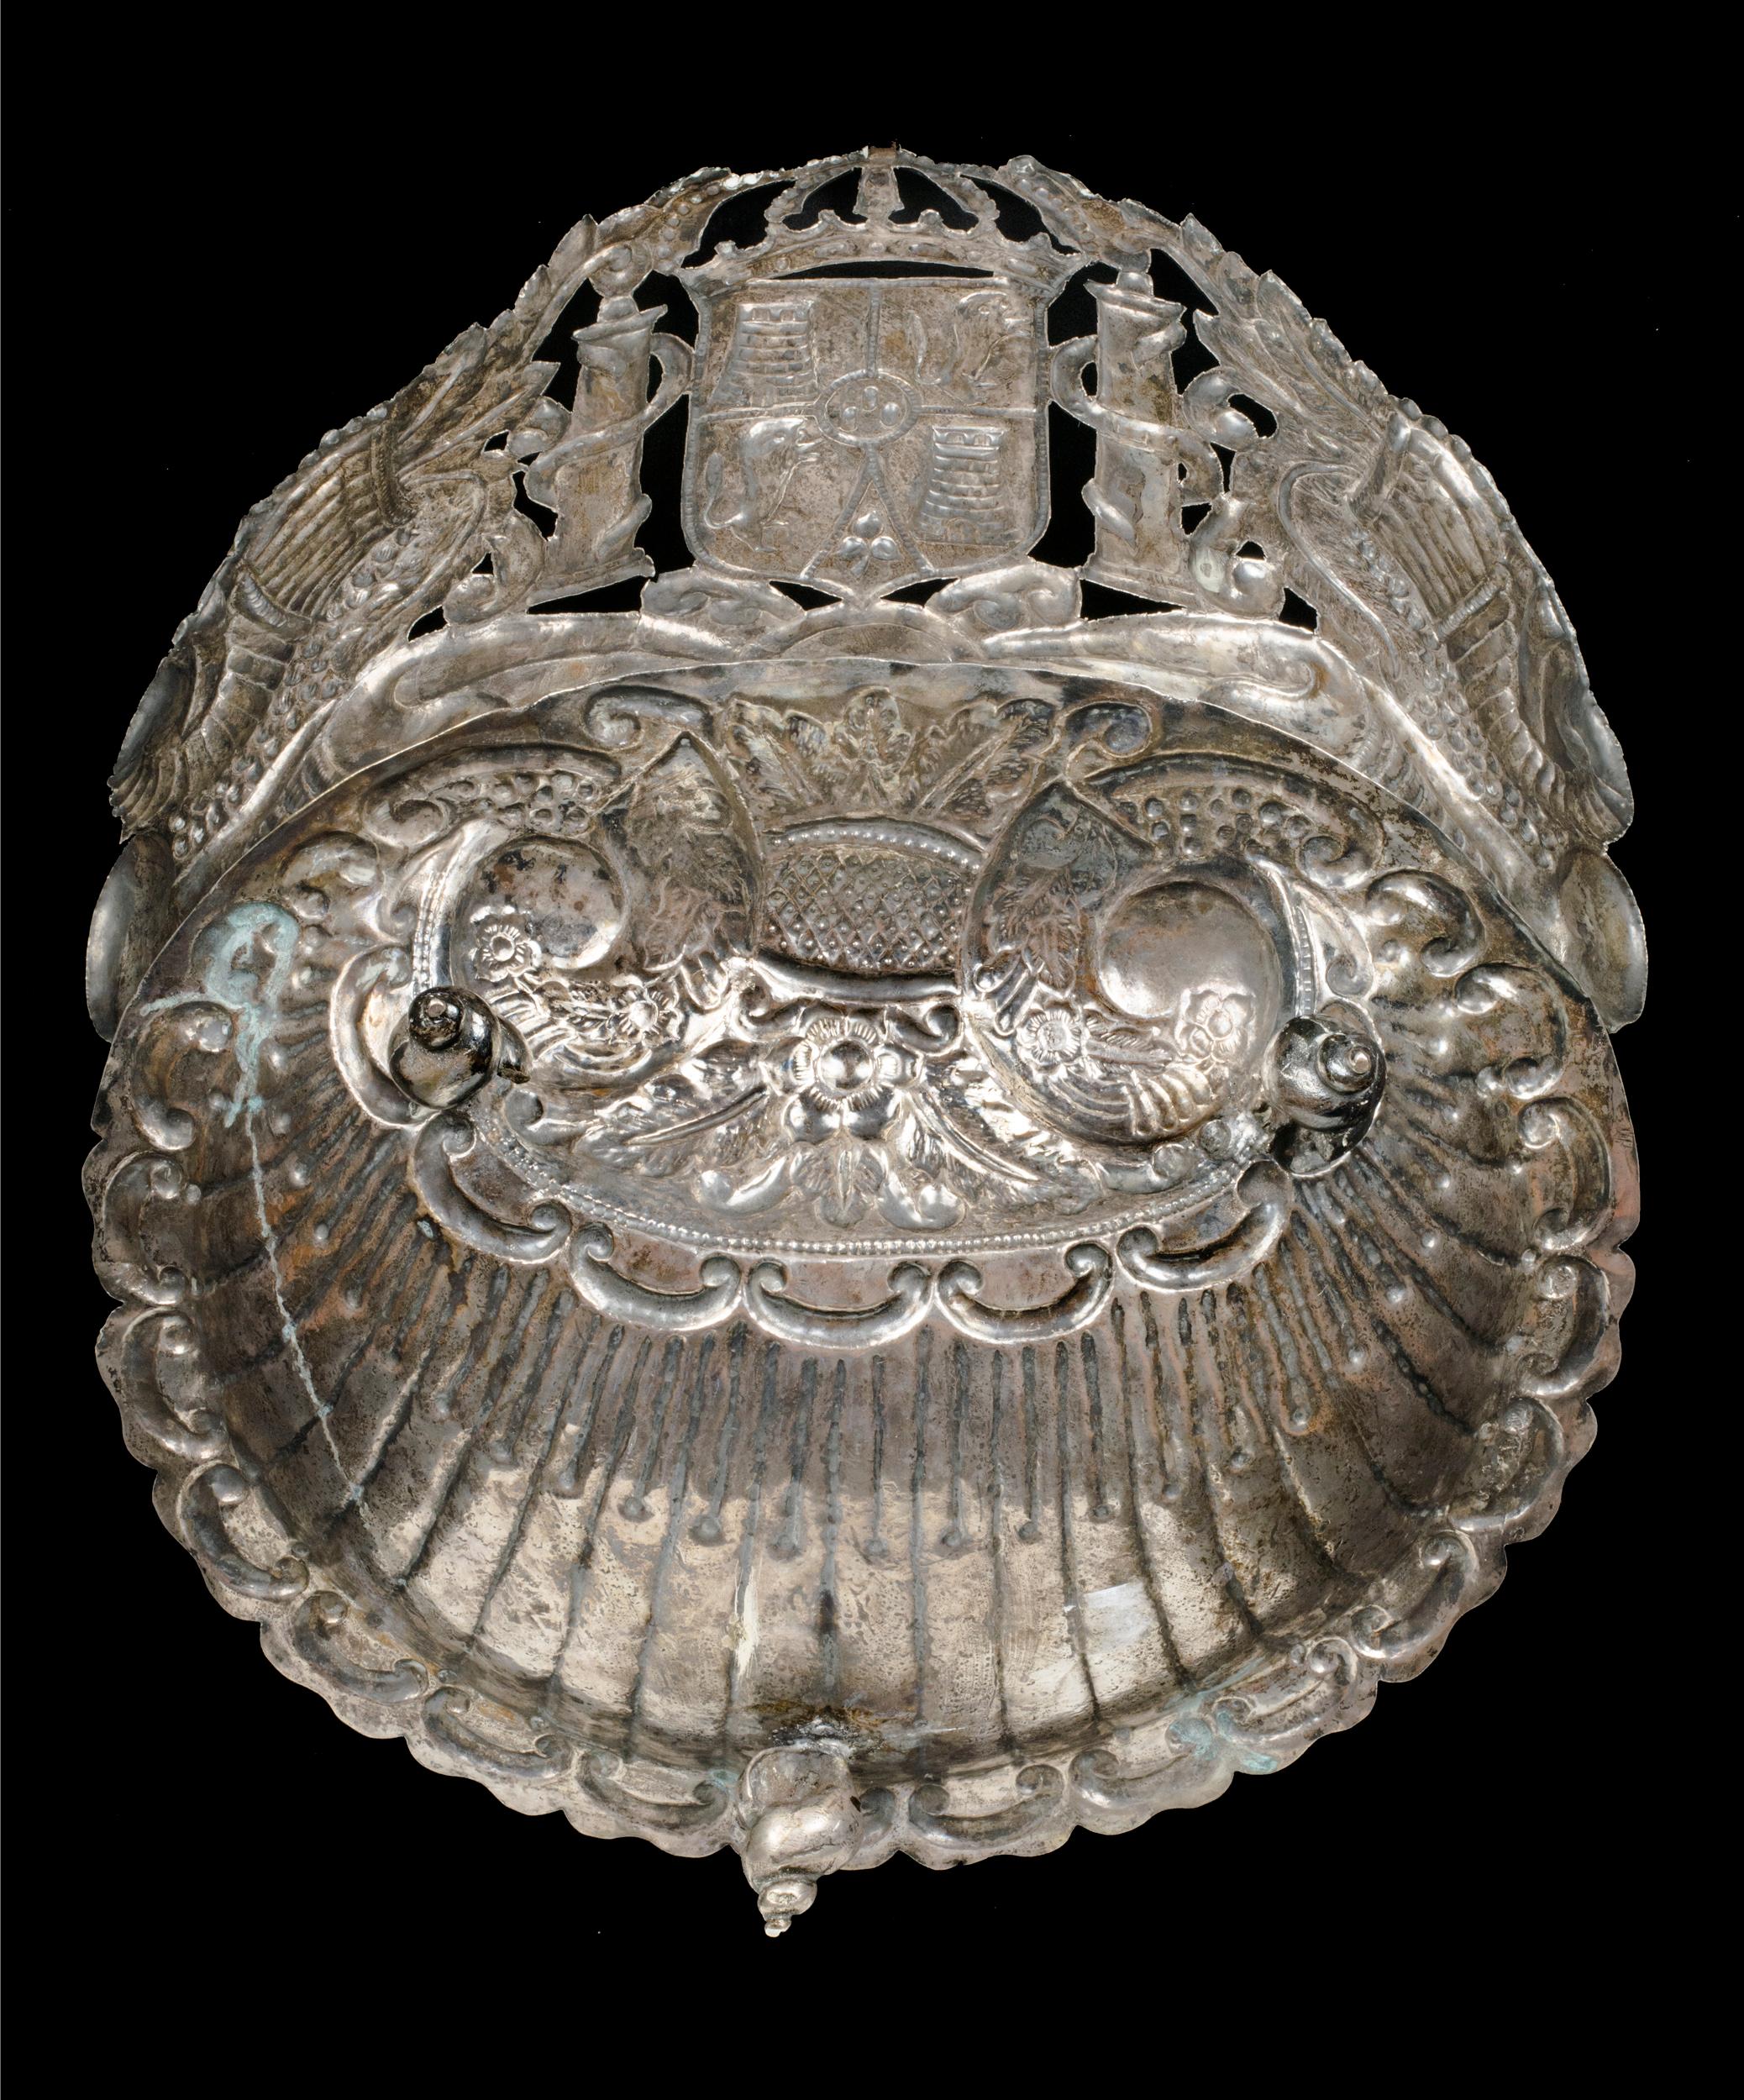 Spanish Colonial Silver Baptismal Dish  - Old Masters Art by Unknown